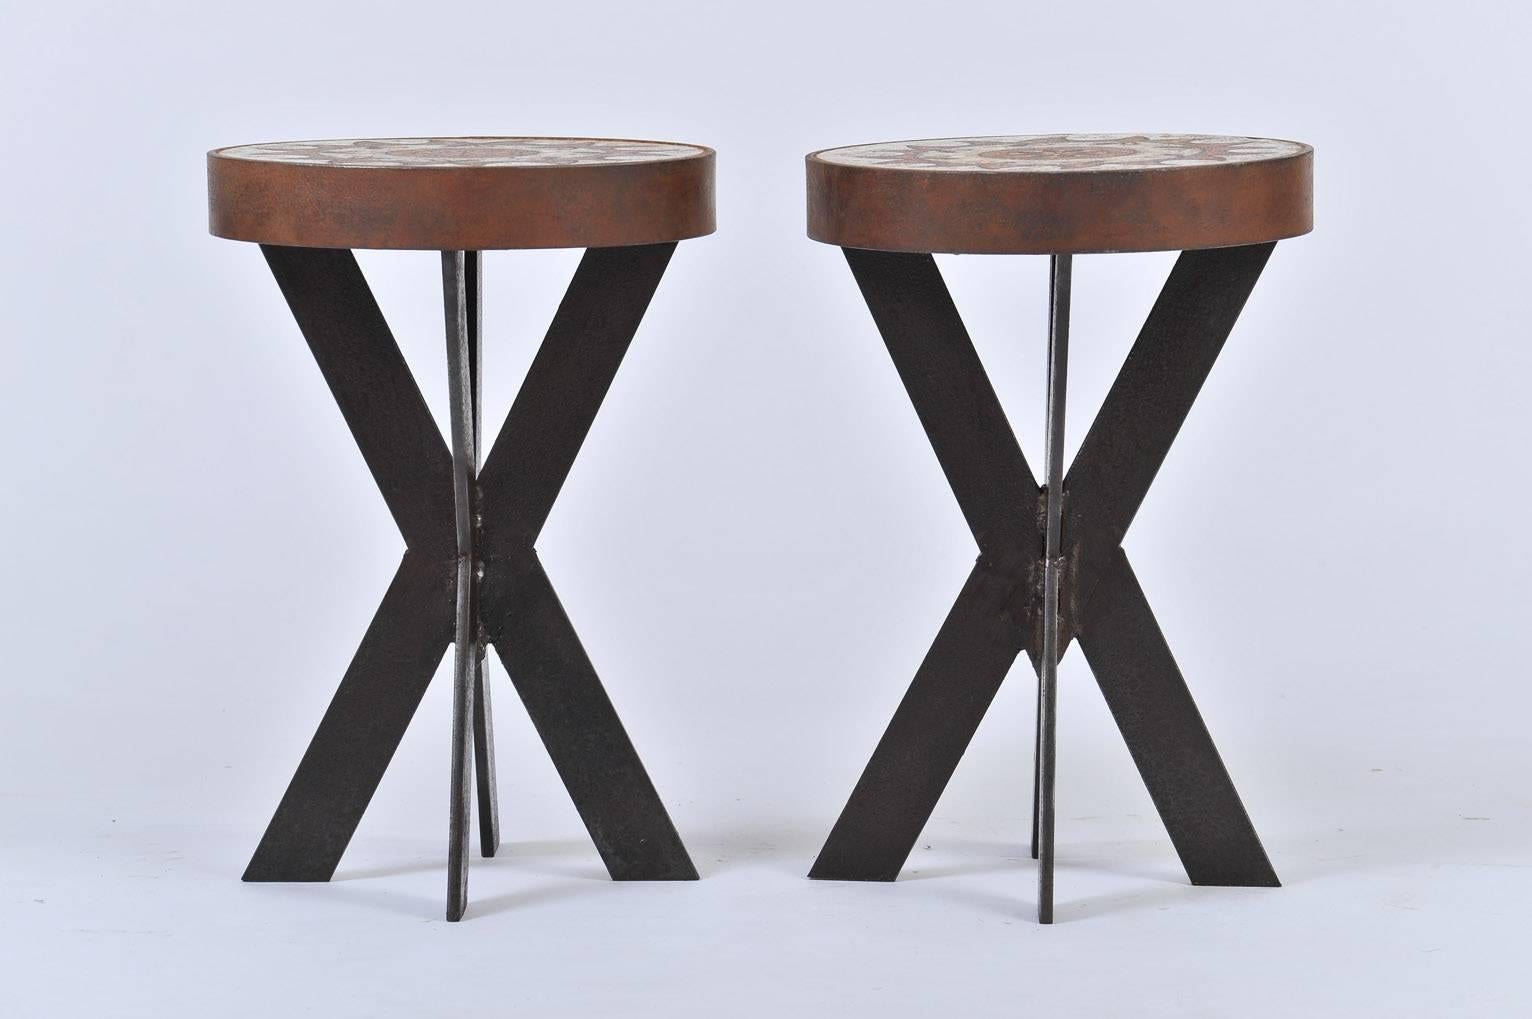 A pair of ceramic top iron stools (or side tables), the quadripod iron bases supporting circular hand painted polychrome ceramic tops
France, Circa 1960
3 available in total (one pair and a single, see other listing to view the single one)